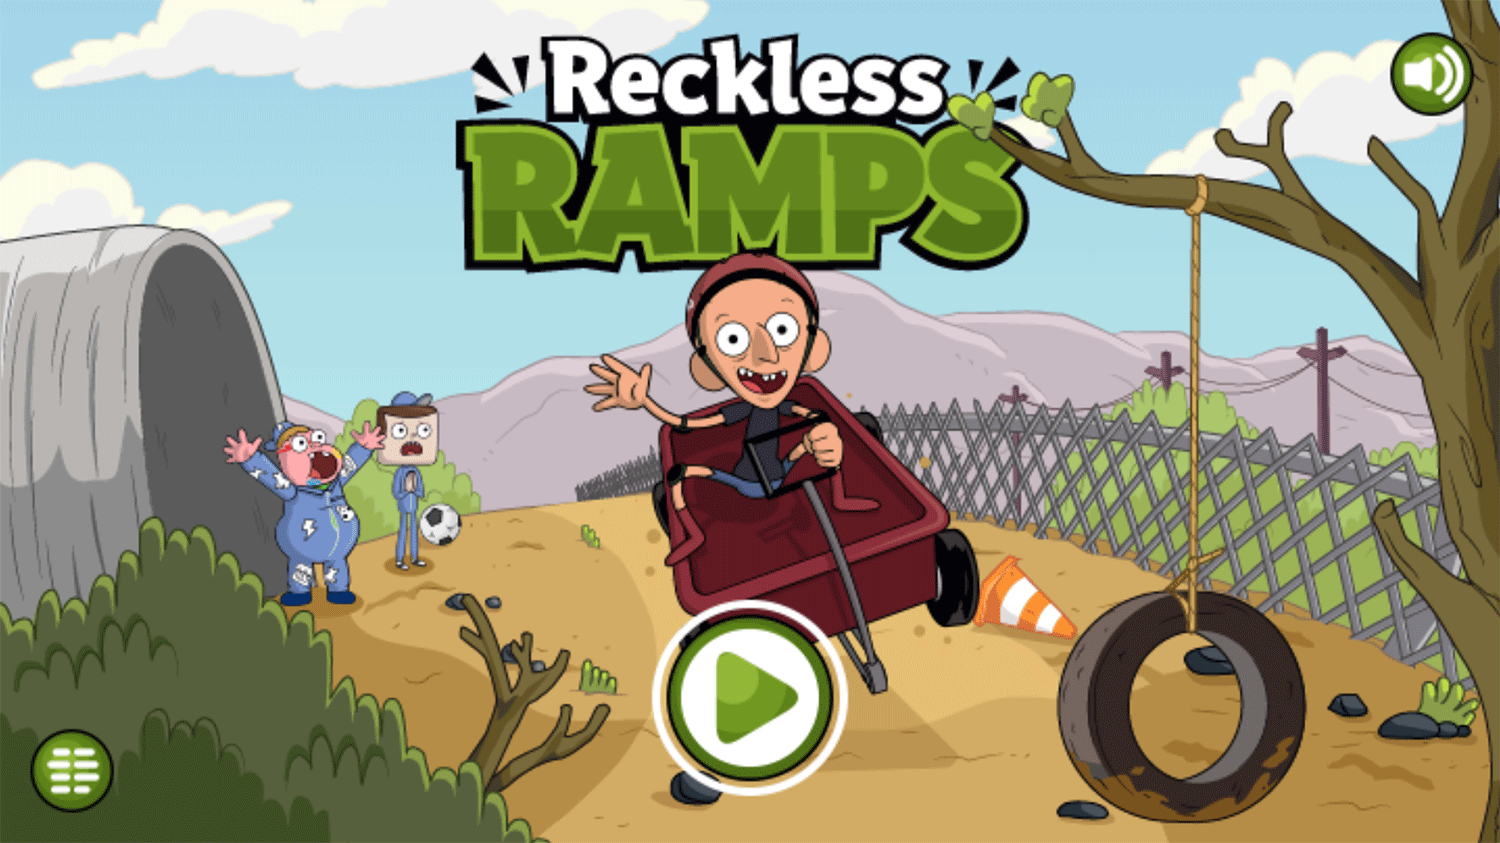 Clarence Reckless Ramps Game Welcome Screen Screenshot.